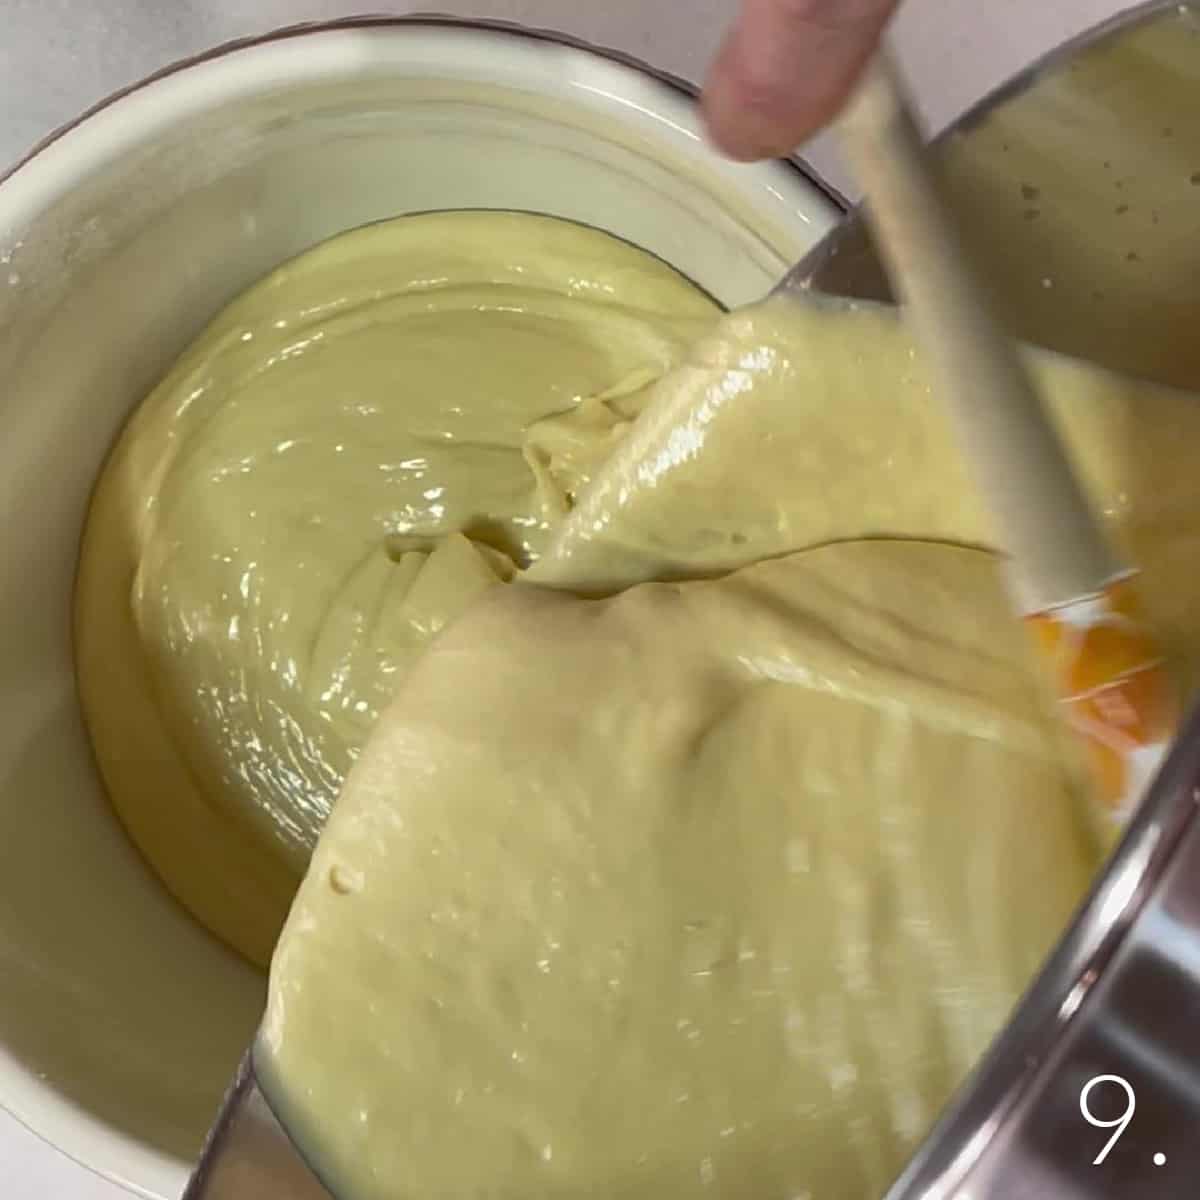 Golden cupcake batter being poured into a bowl with a pour spout.